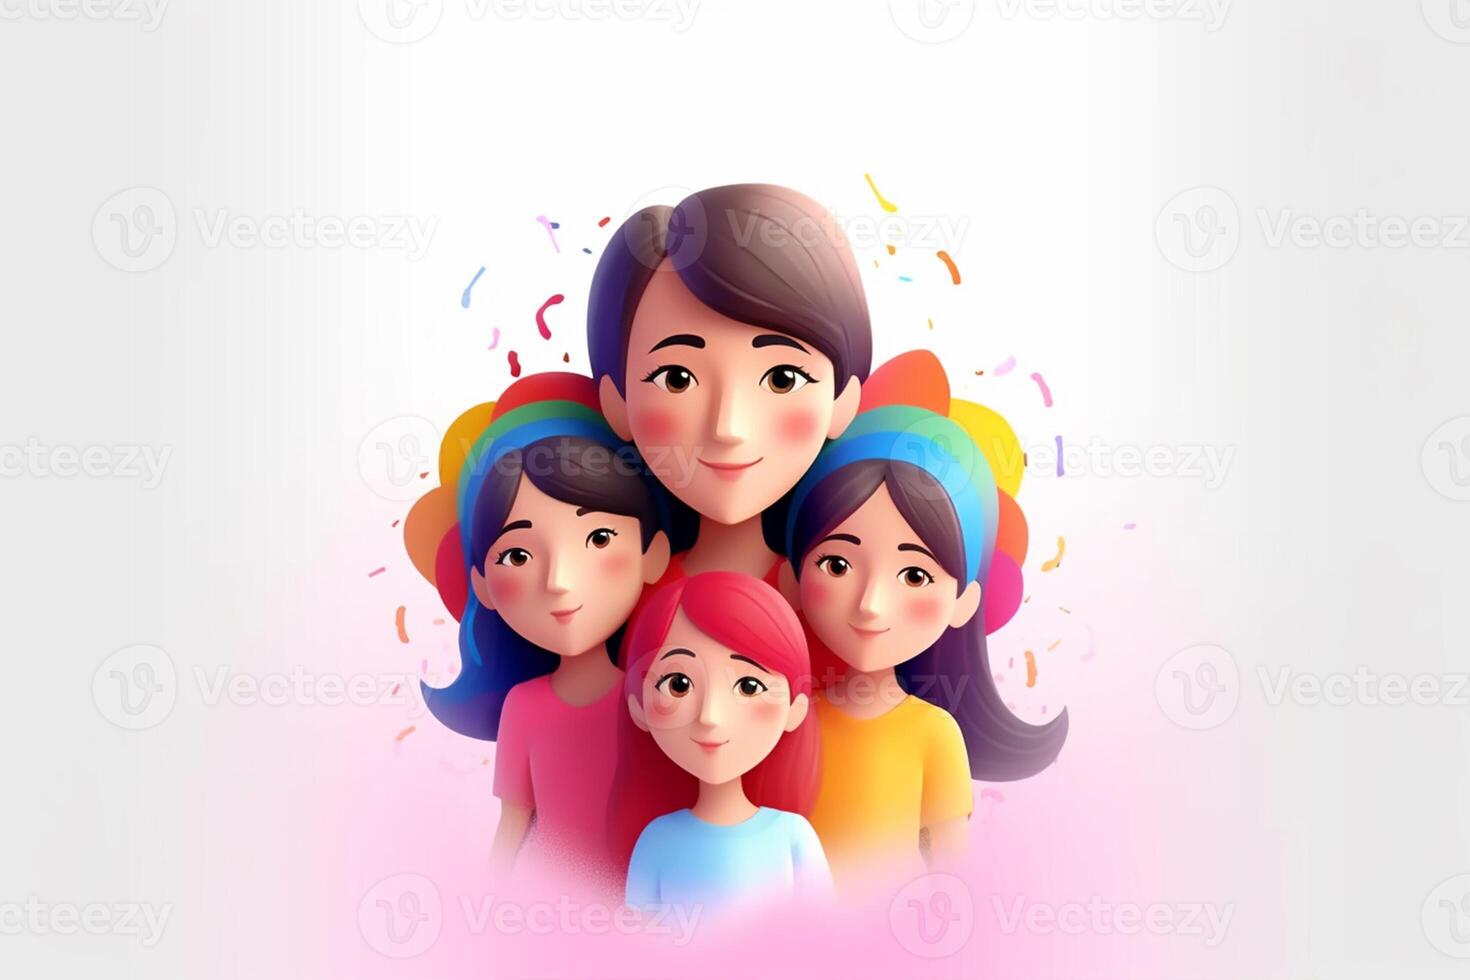 Happy mother day, mother with child 3d illustration on isolated background photo